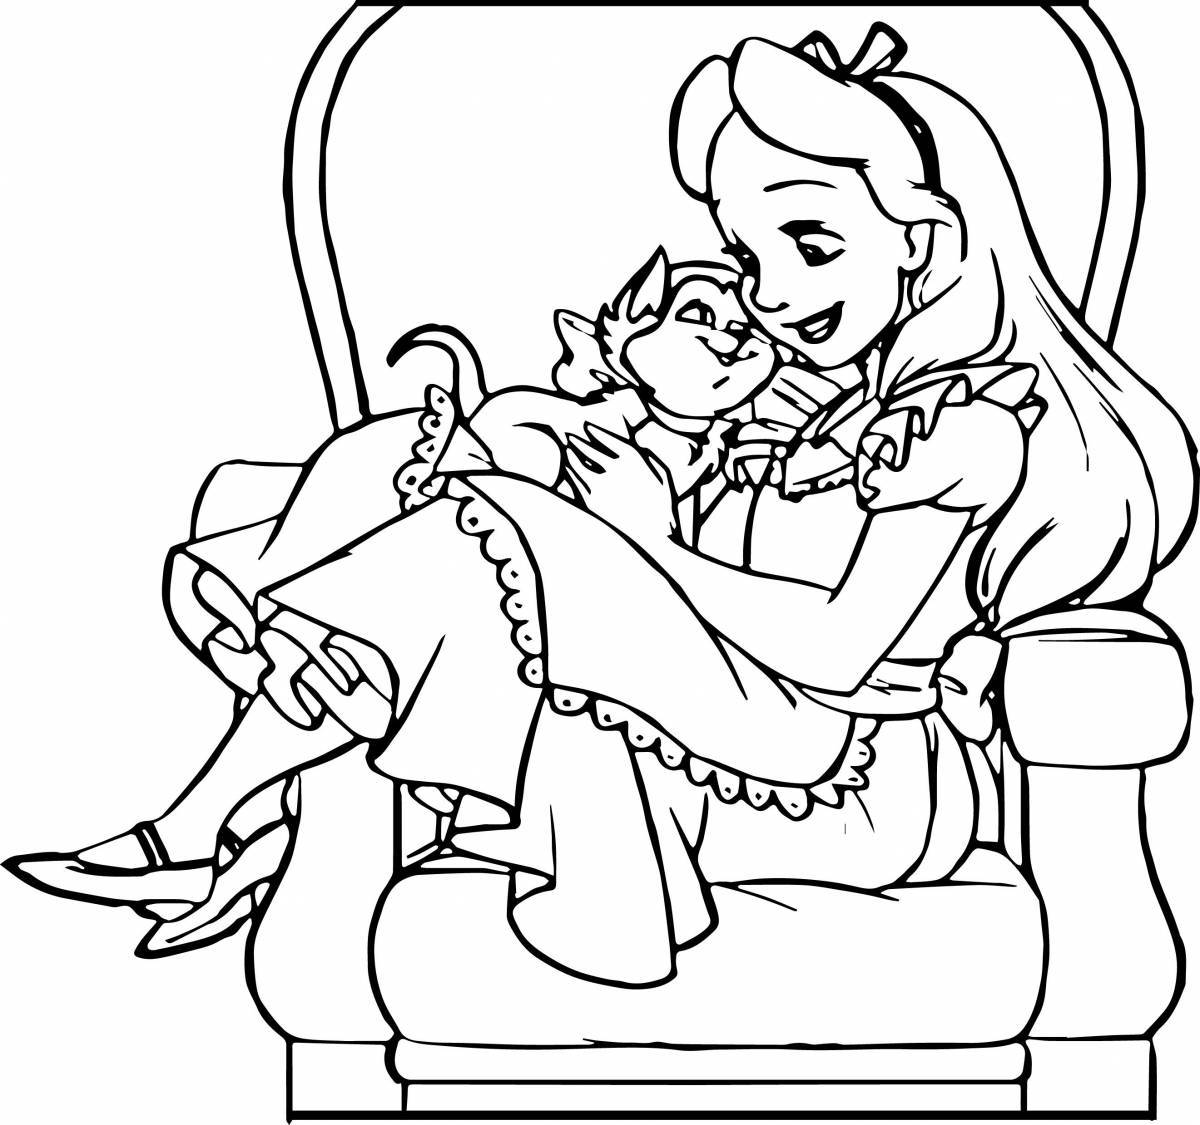 Magic alice find coloring pages